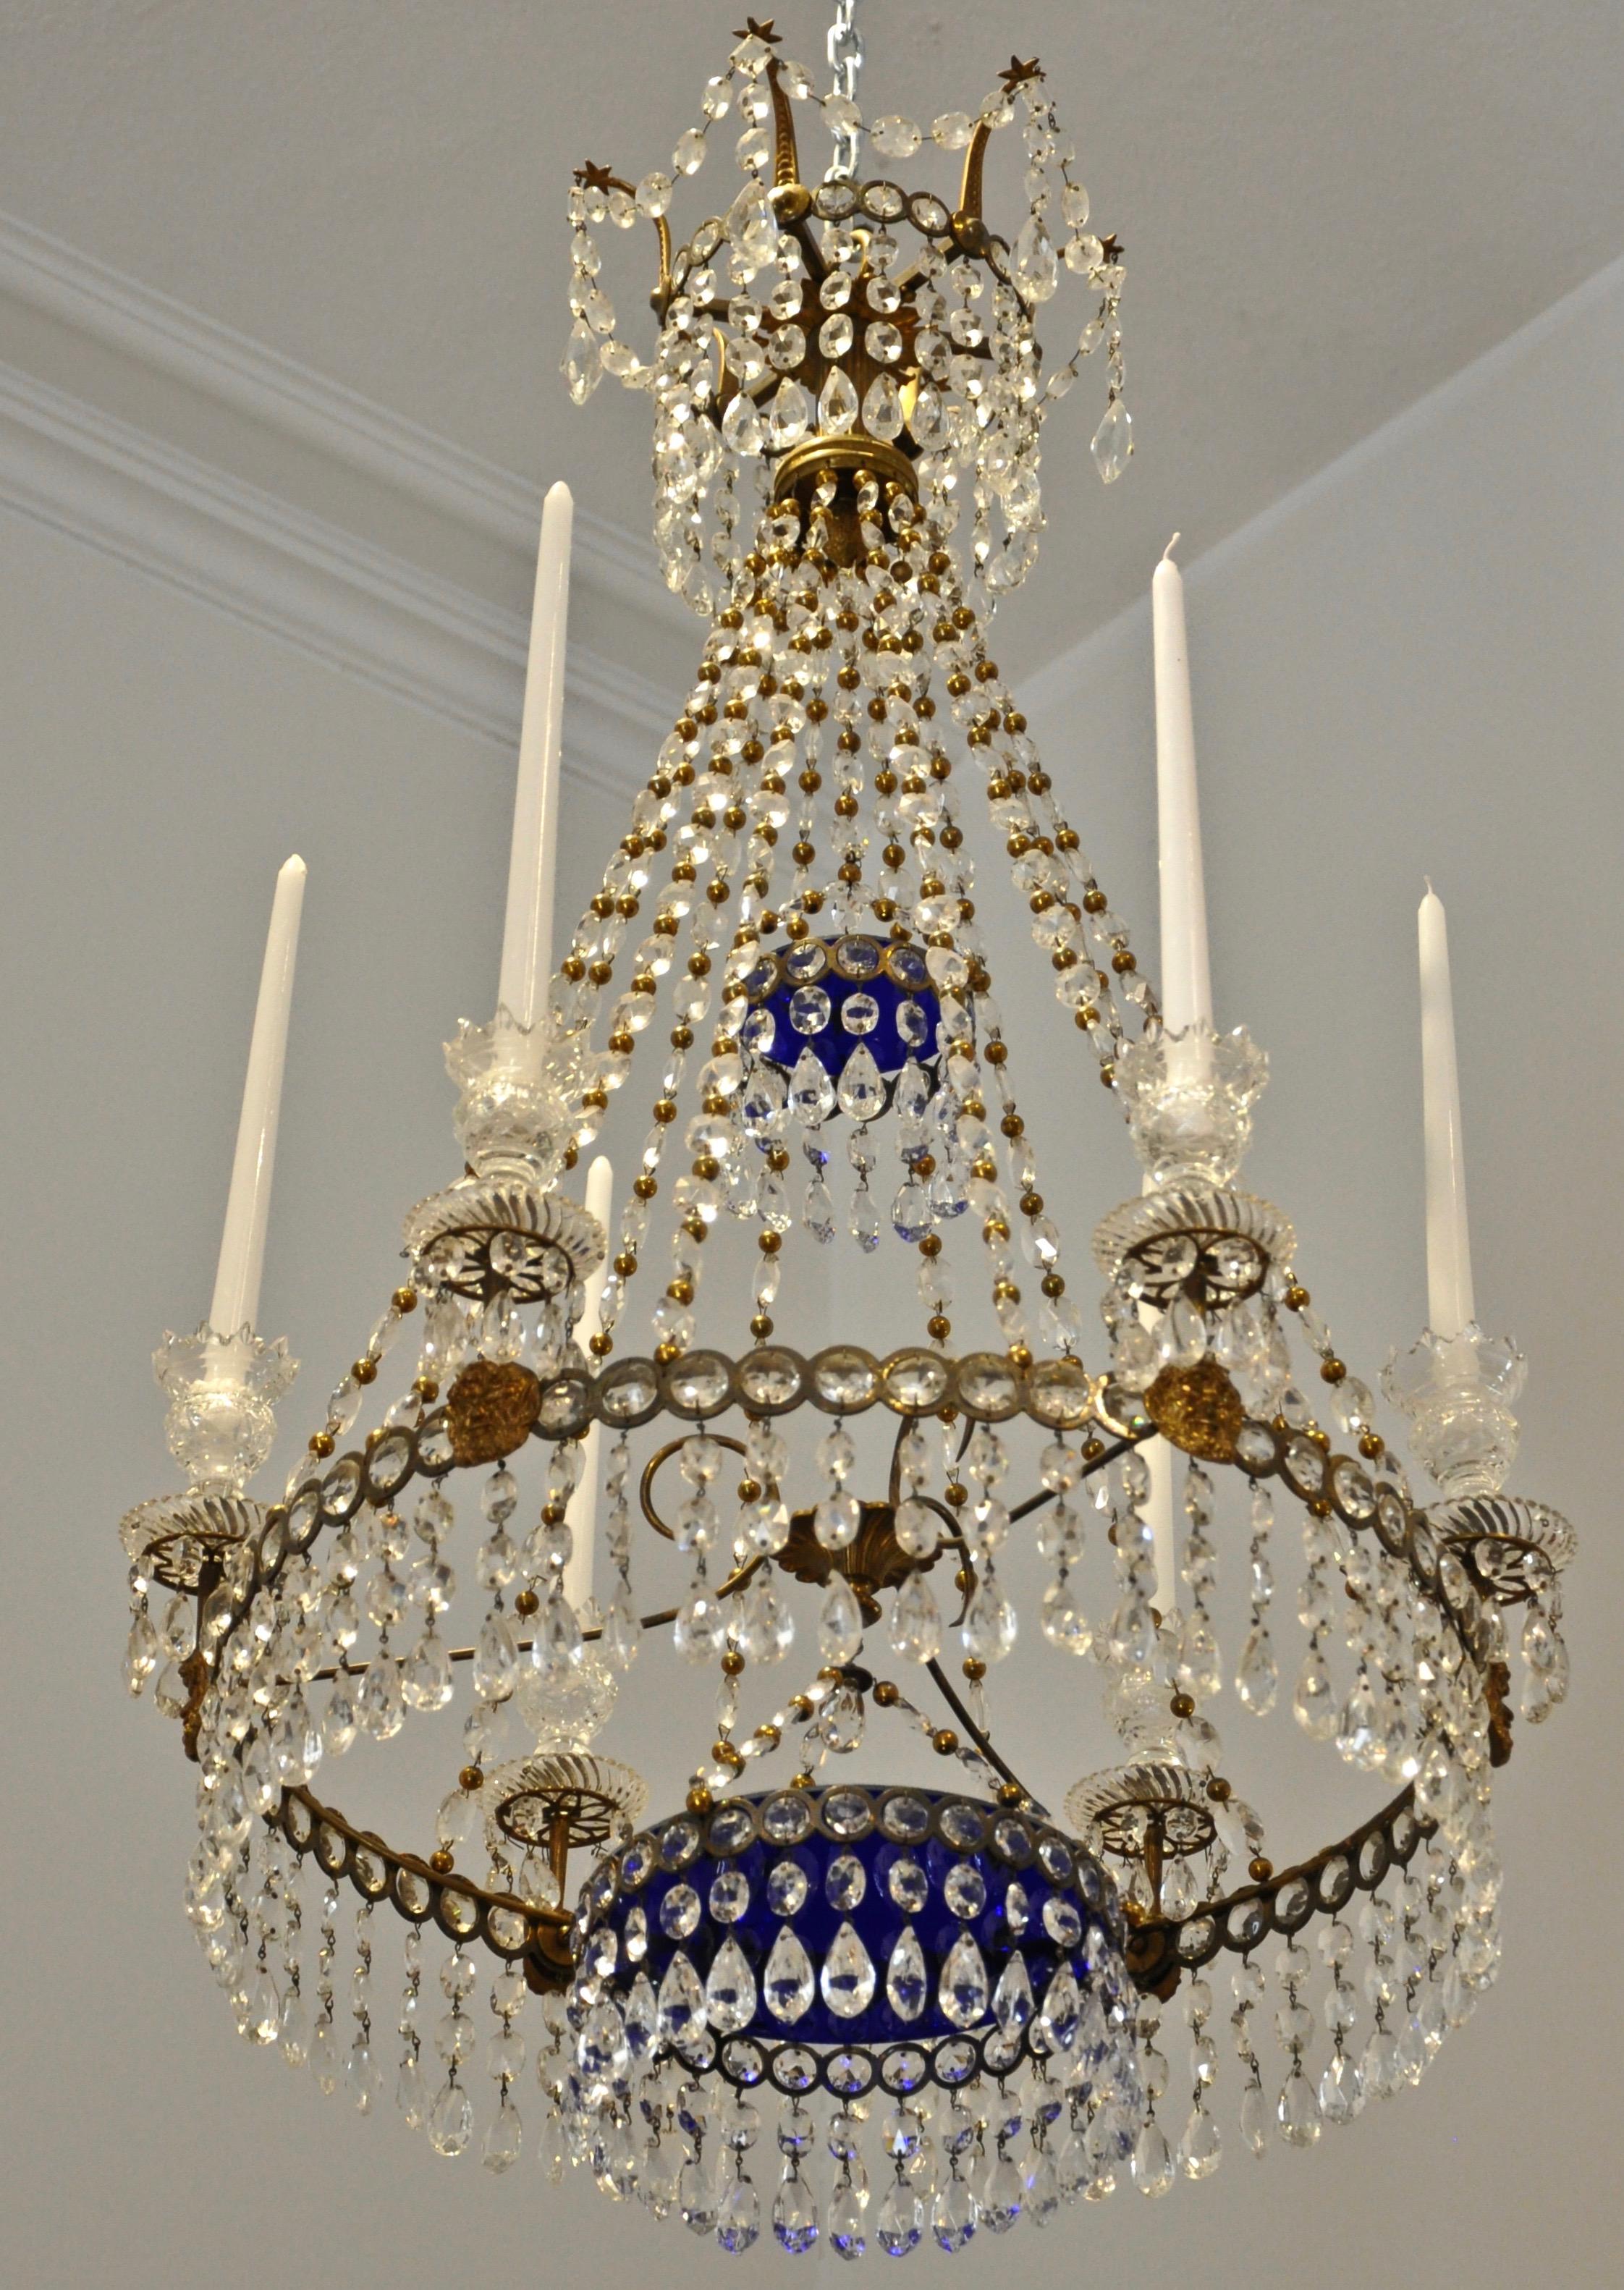 Early to mid-19th century Baltic or Scandinavian neoclassical chandelier. Bronze with period crystals and blue glass plates.

Can be French wired for electricity at client's request (no additional charge).